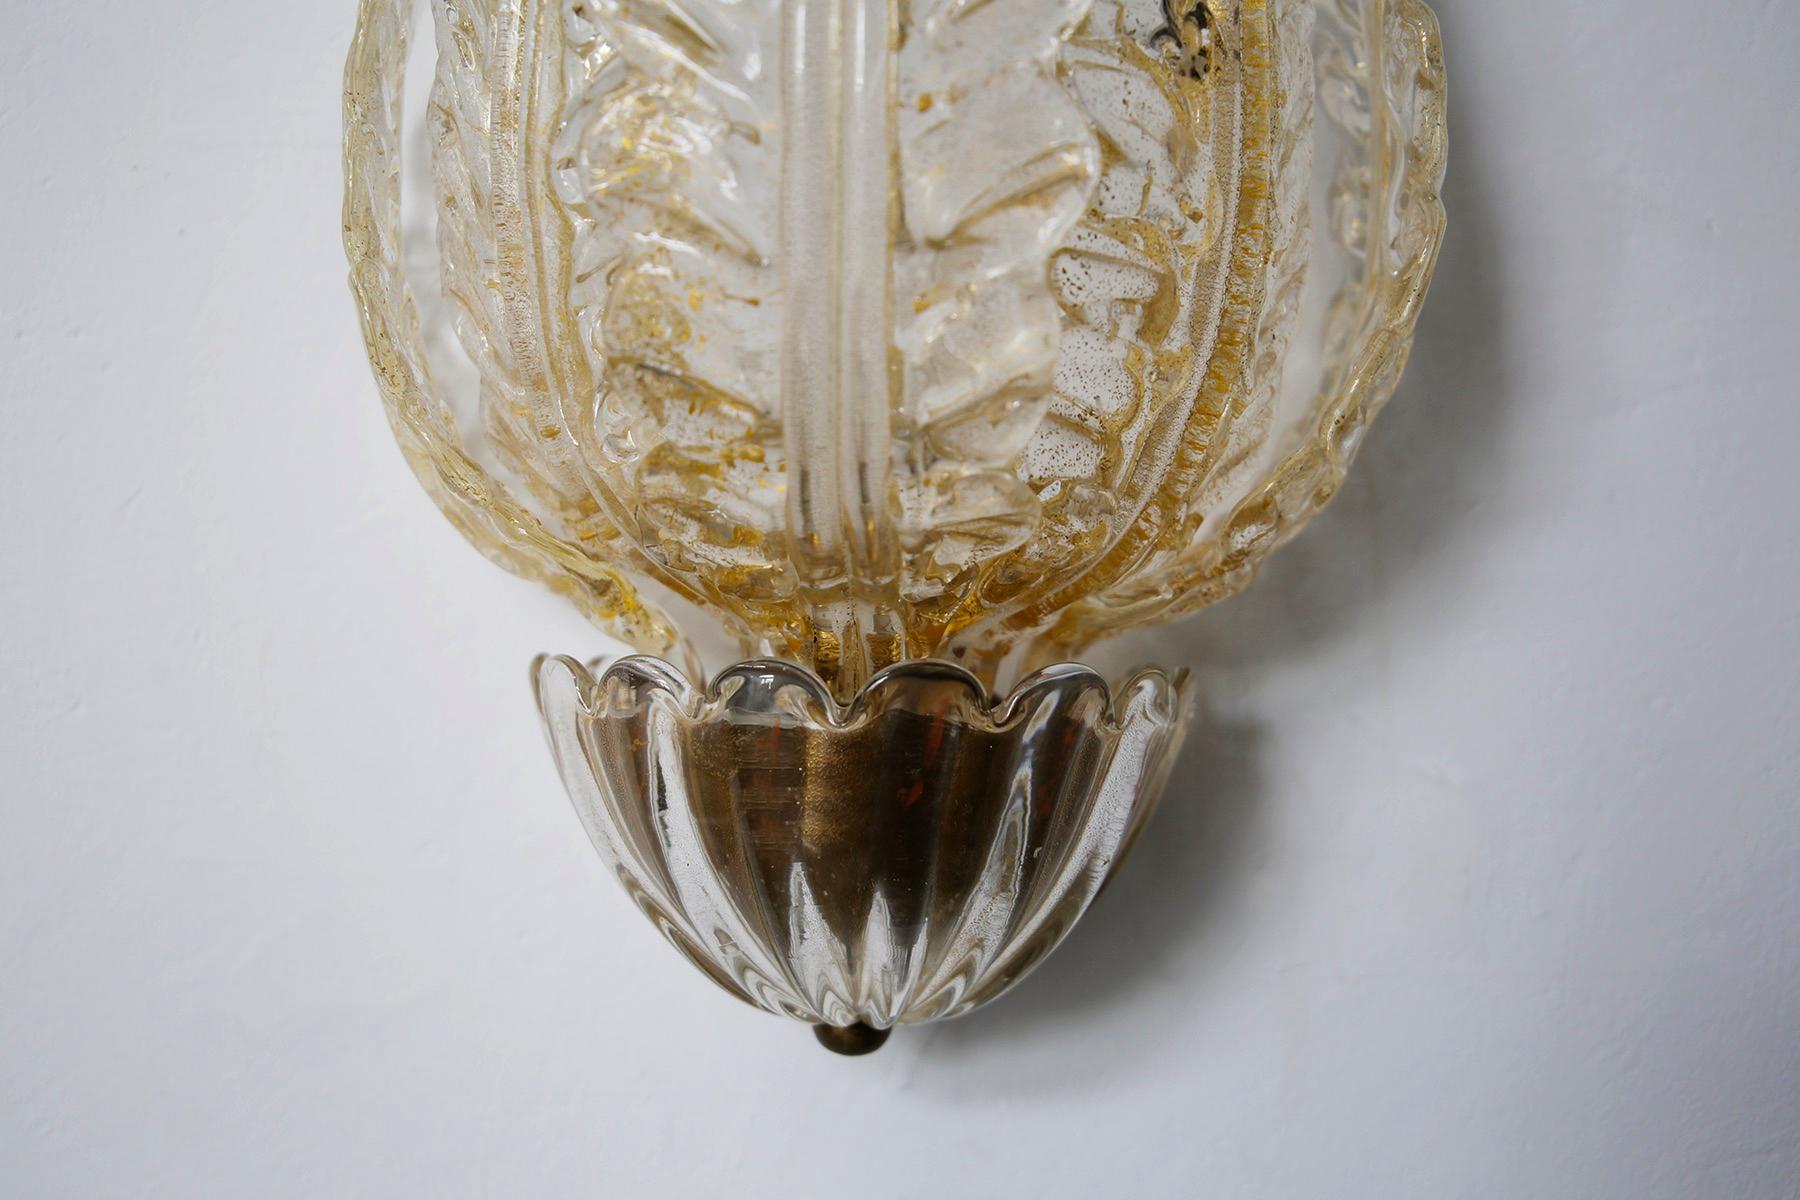 Italian Venini Wall Lamp in Murano Glass Gold and Brass with Three Leaves, from 1930s